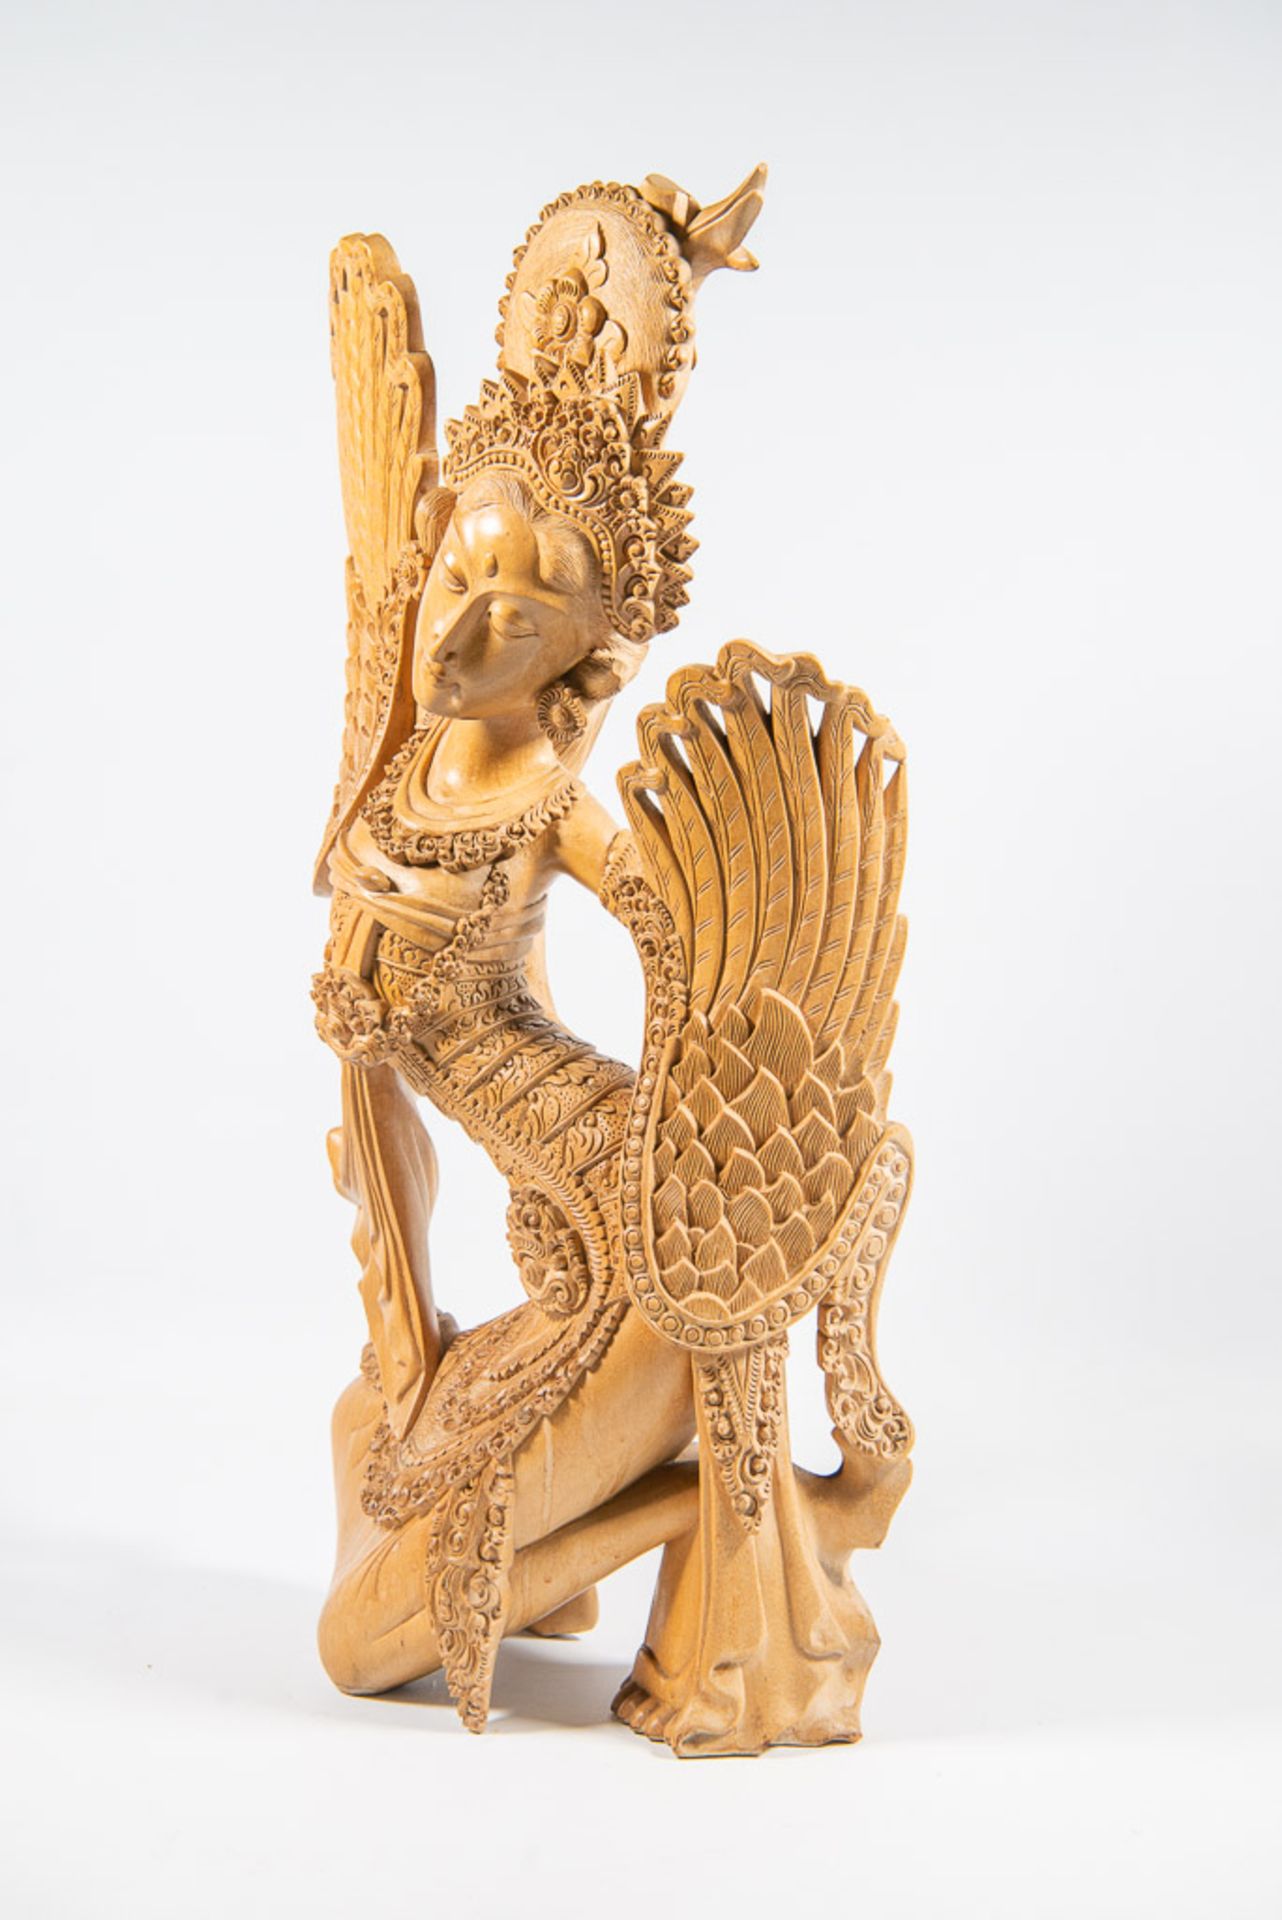 Indonesian wood sculpture - Image 5 of 5